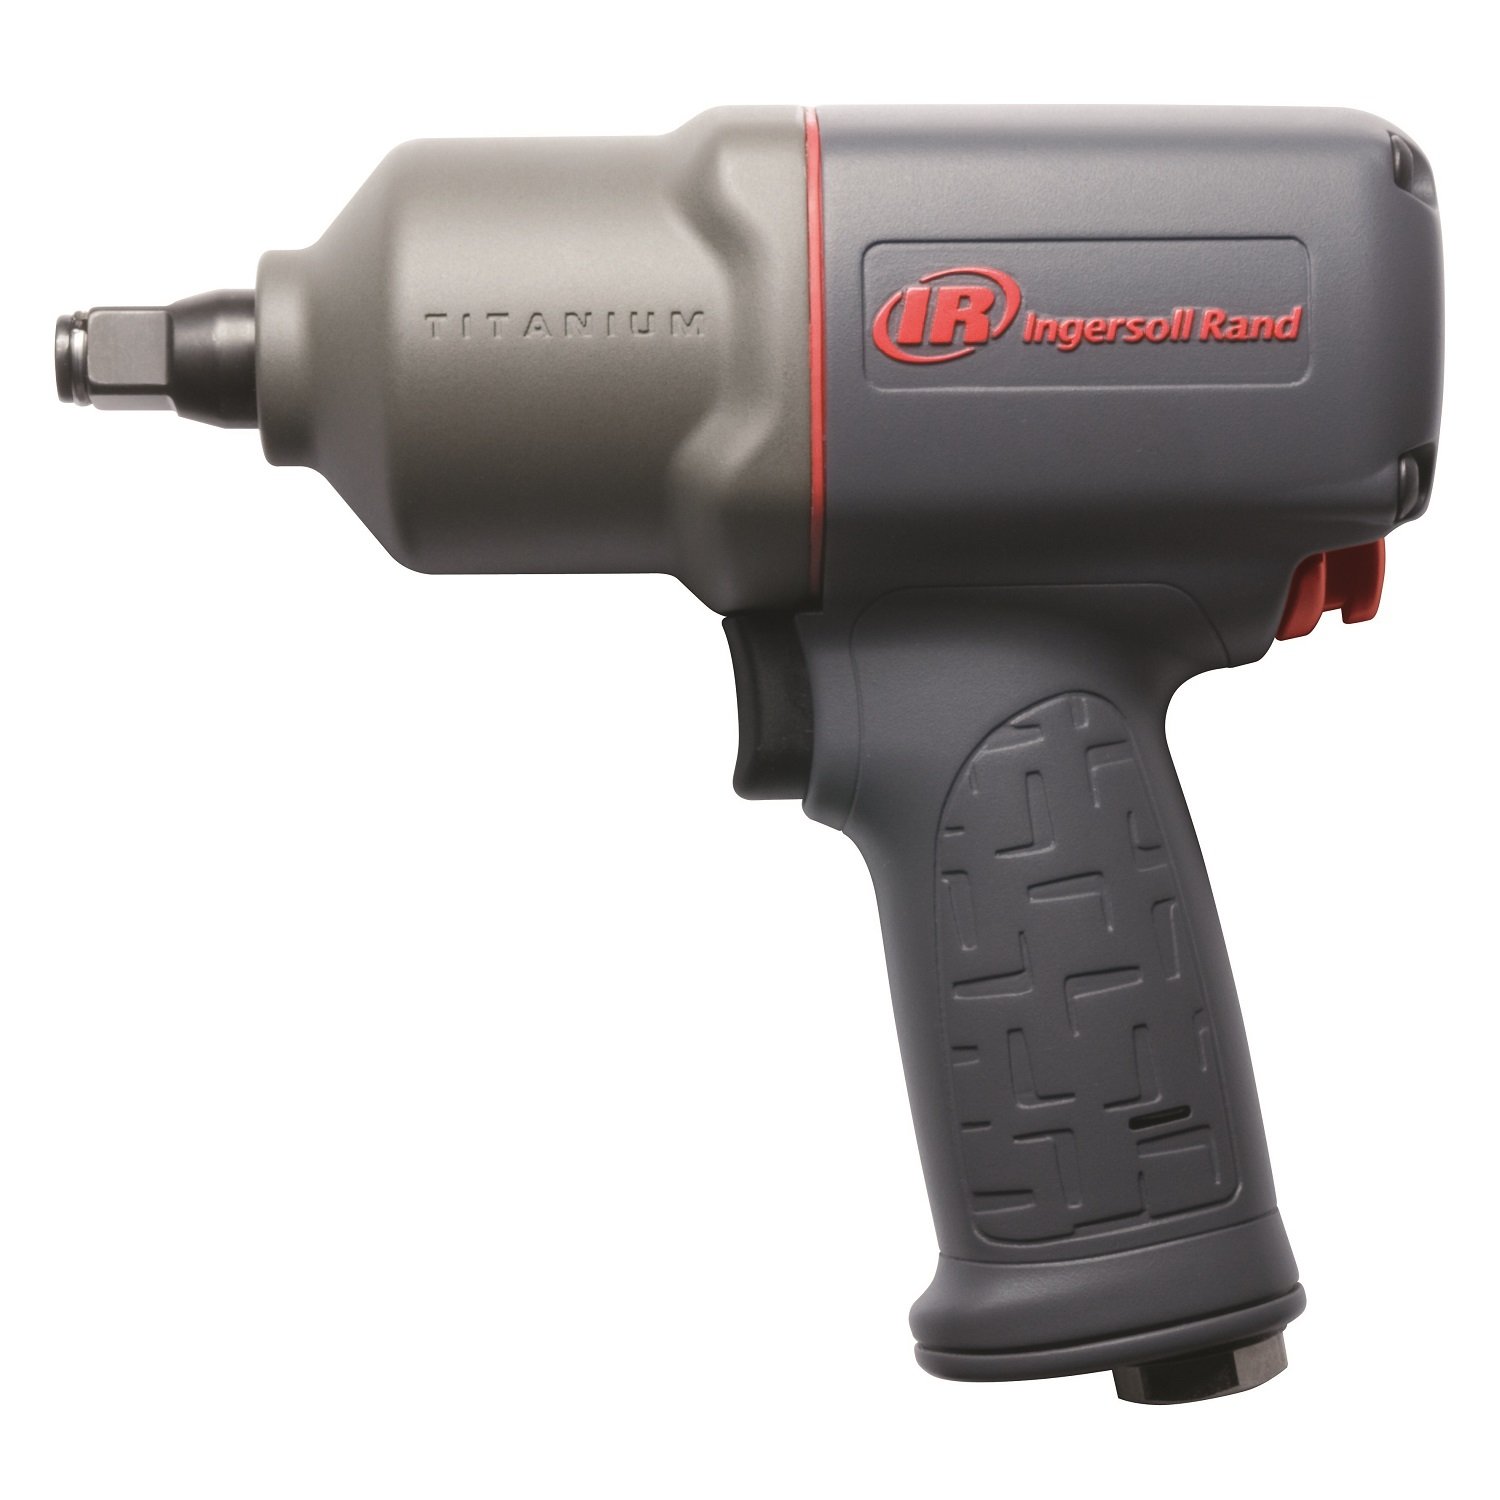 Ingersoll Rand Pneumatic 1/2" Composite Air Impact Wrench 2135TIMAX